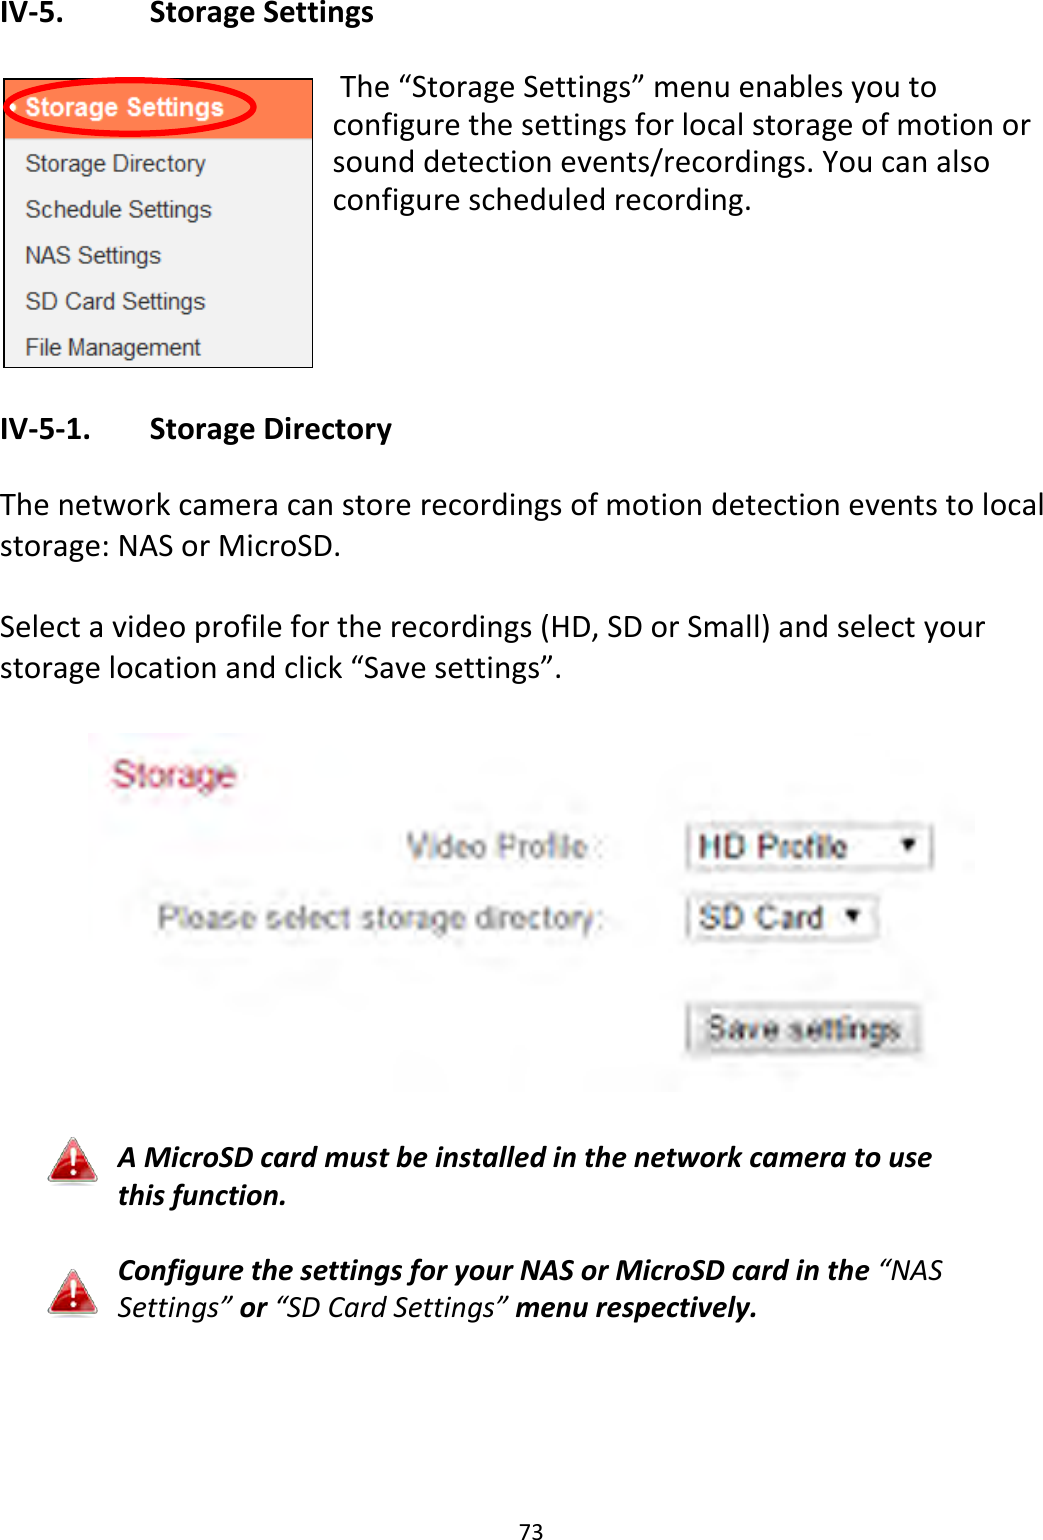 73  IV-5.    Storage Settings   The “Storage Settings” menu enables you to configure the settings for local storage of motion or sound detection events/recordings. You can also configure scheduled recording.     IV-5-1.   Storage Directory  The network camera can store recordings of motion detection events to local storage: NAS or MicroSD.   Select a video profile for the recordings (HD, SD or Small) and select your storage location and click “Save settings”.    A MicroSD card must be installed in the network camera to use this function.  Configure the settings for your NAS or MicroSD card in the “NAS Settings” or “SD Card Settings” menu respectively.   